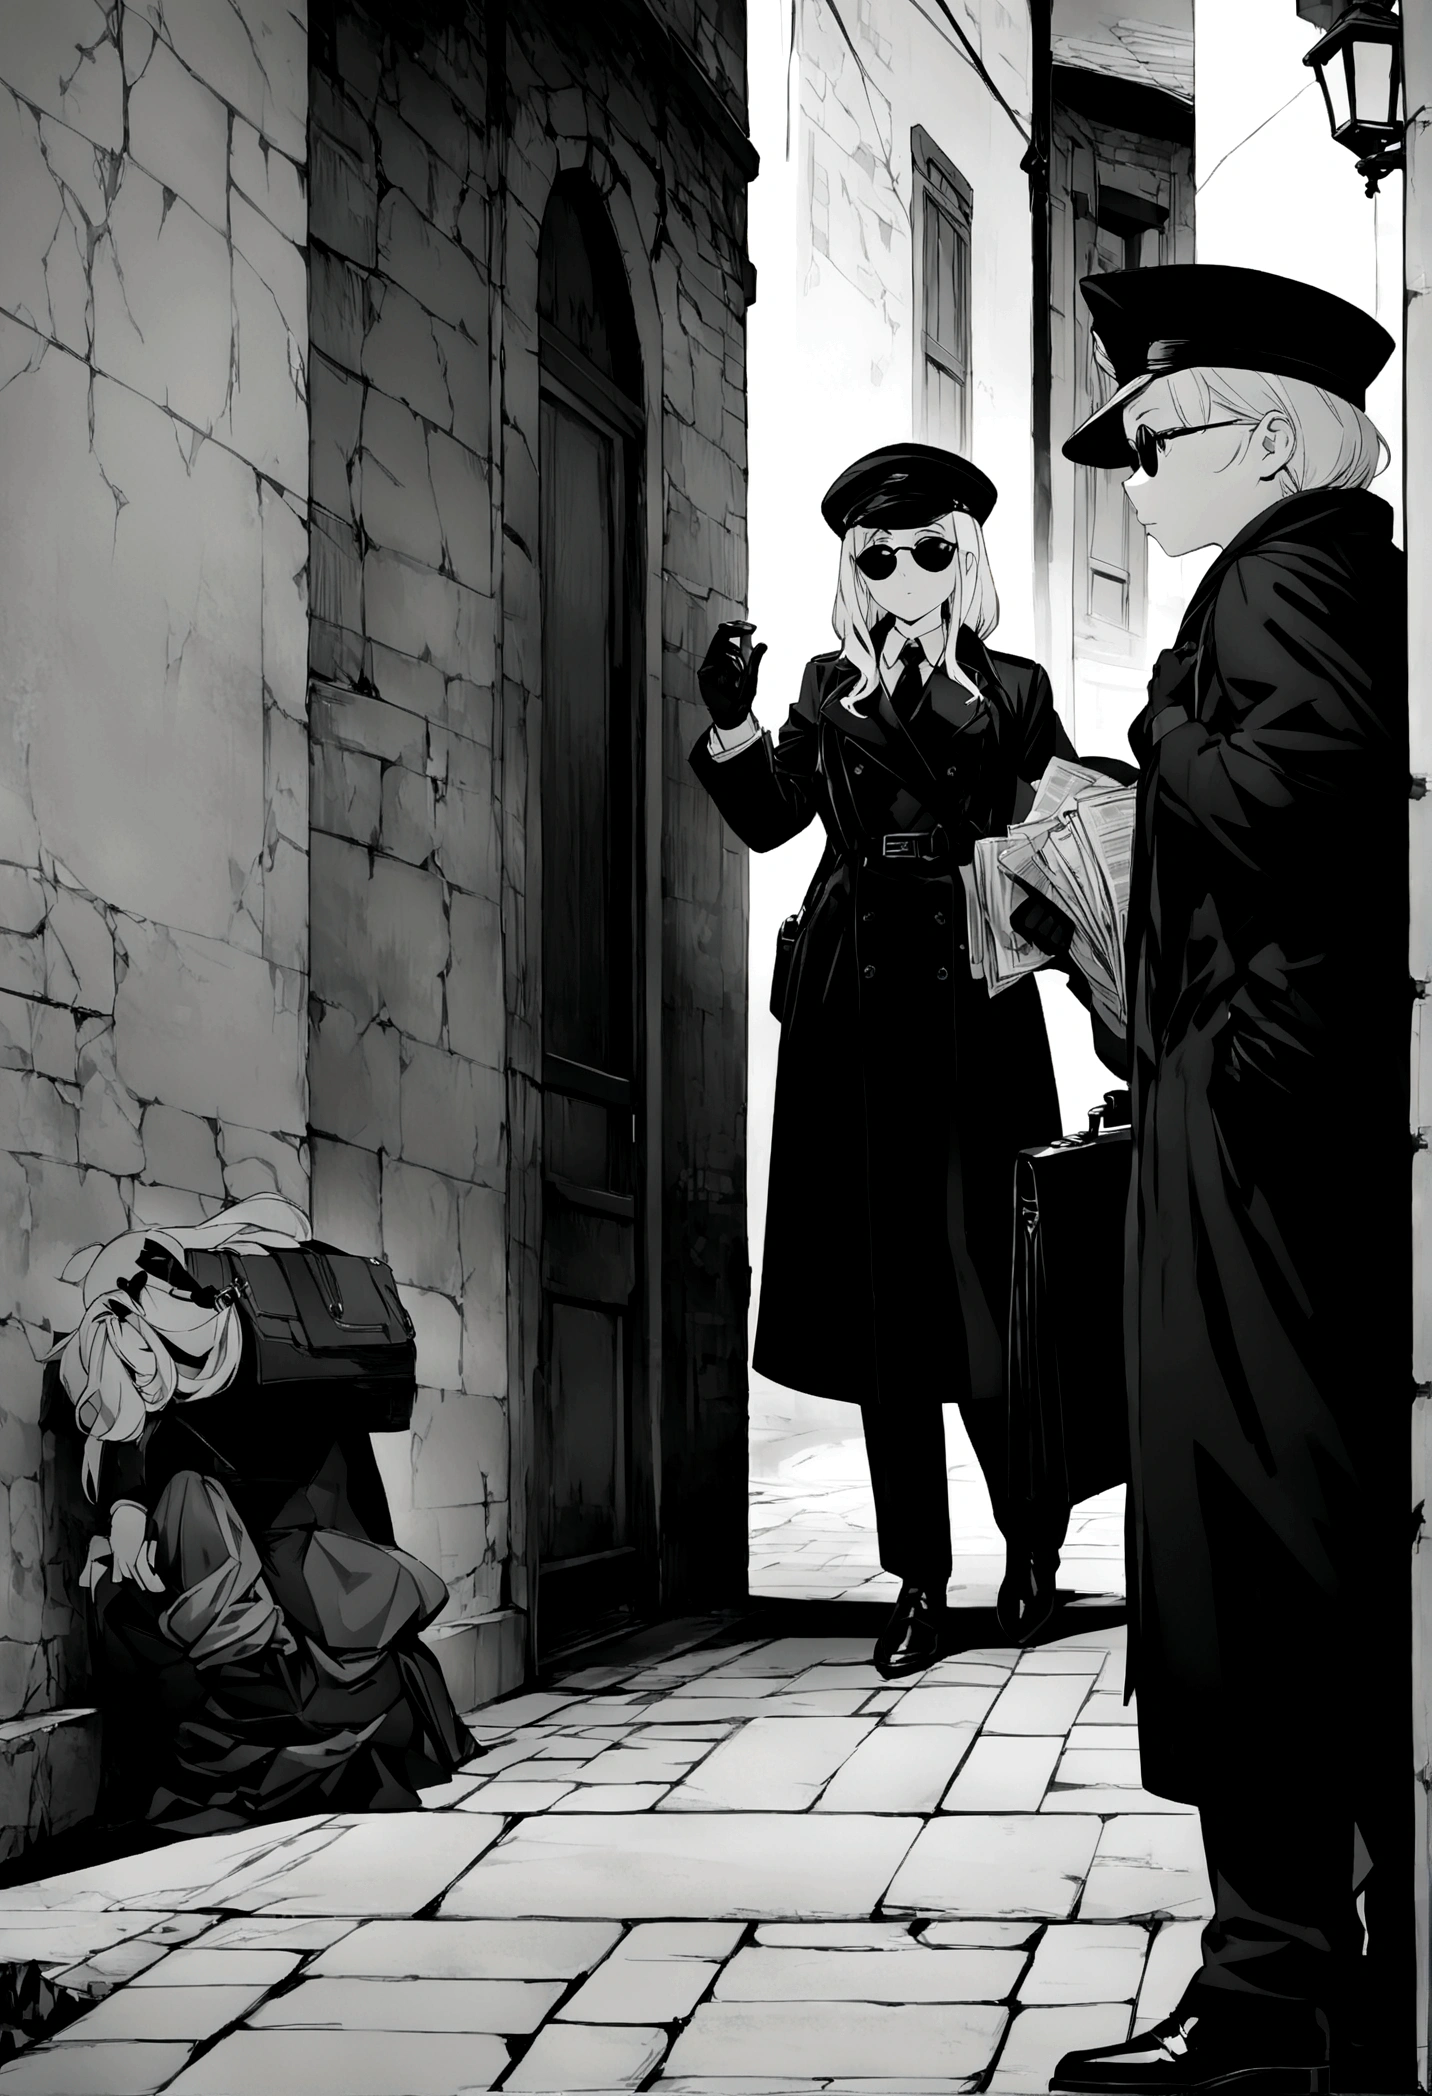 ((masterpiece, highest quality, Highest image quality, High resolution, 8K)), ((Extremely detailed CG unified 8k wallpaper)), ((monochrome)), Screenshot from an old black and white movie, two women having a secret conversation on a street corner, wearing black hats, black sunglasses, black trench coats, black gloves, black shoes, holding an attache case and newspaper in one hand, HD,